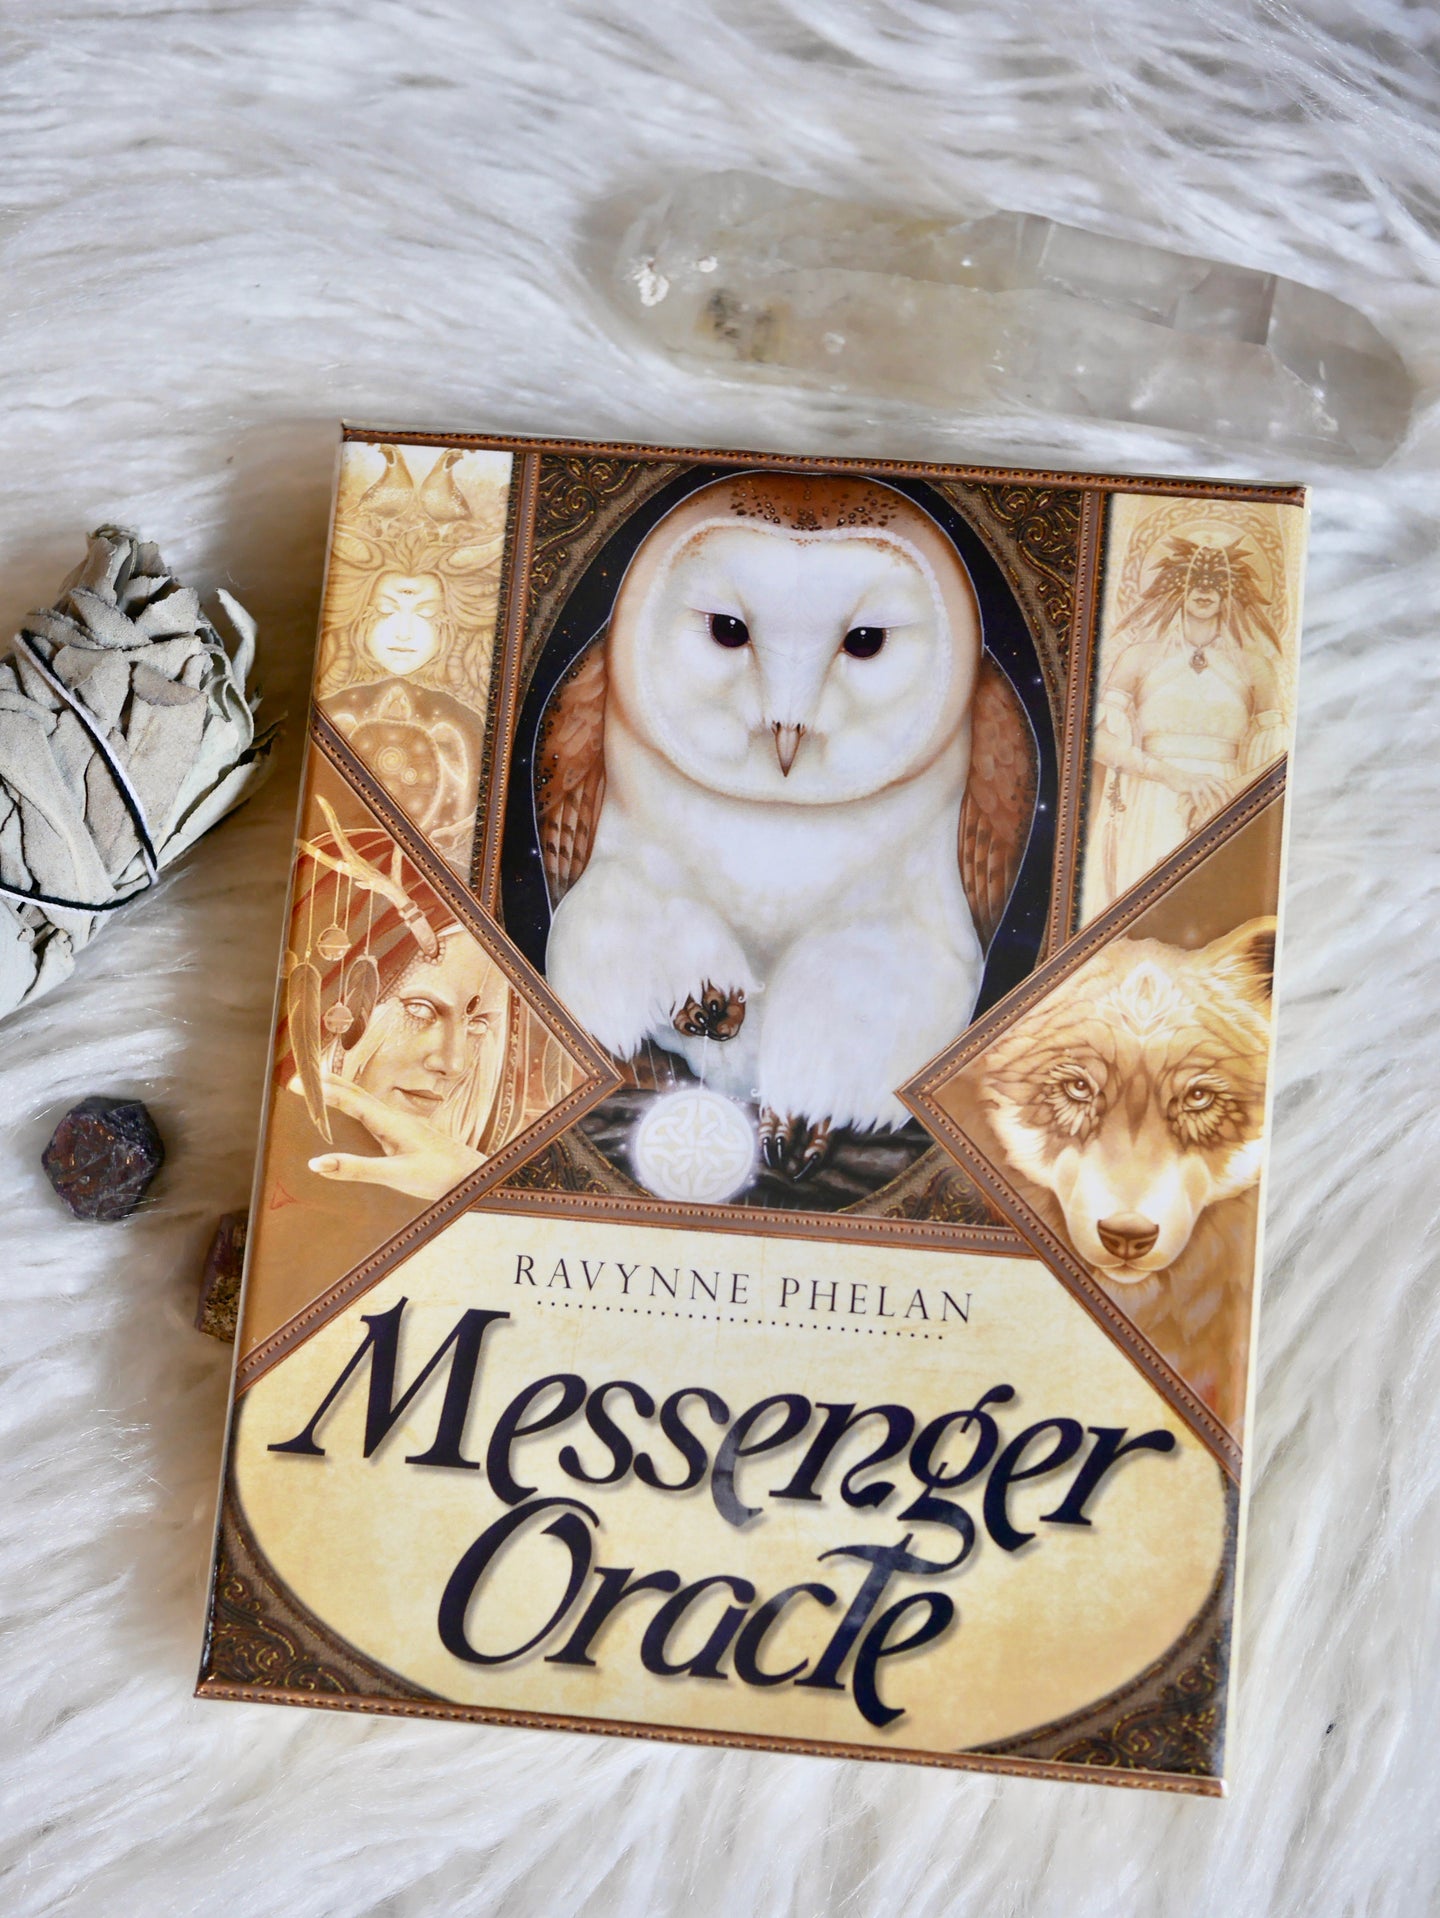 Messenger Oracle cards